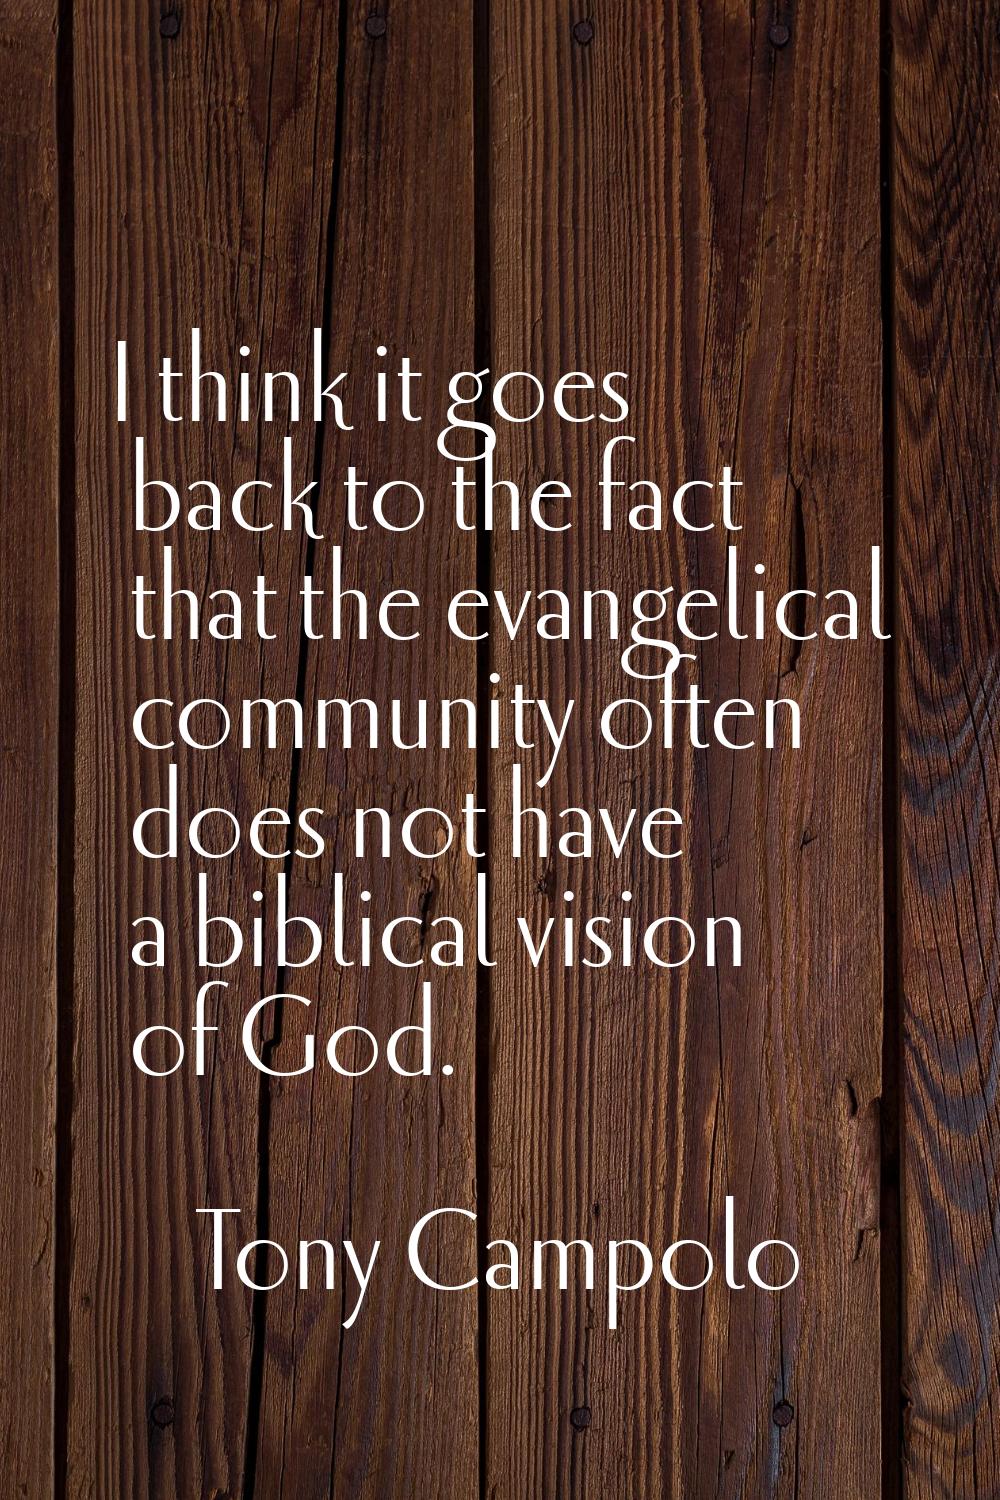 I think it goes back to the fact that the evangelical community often does not have a biblical visi